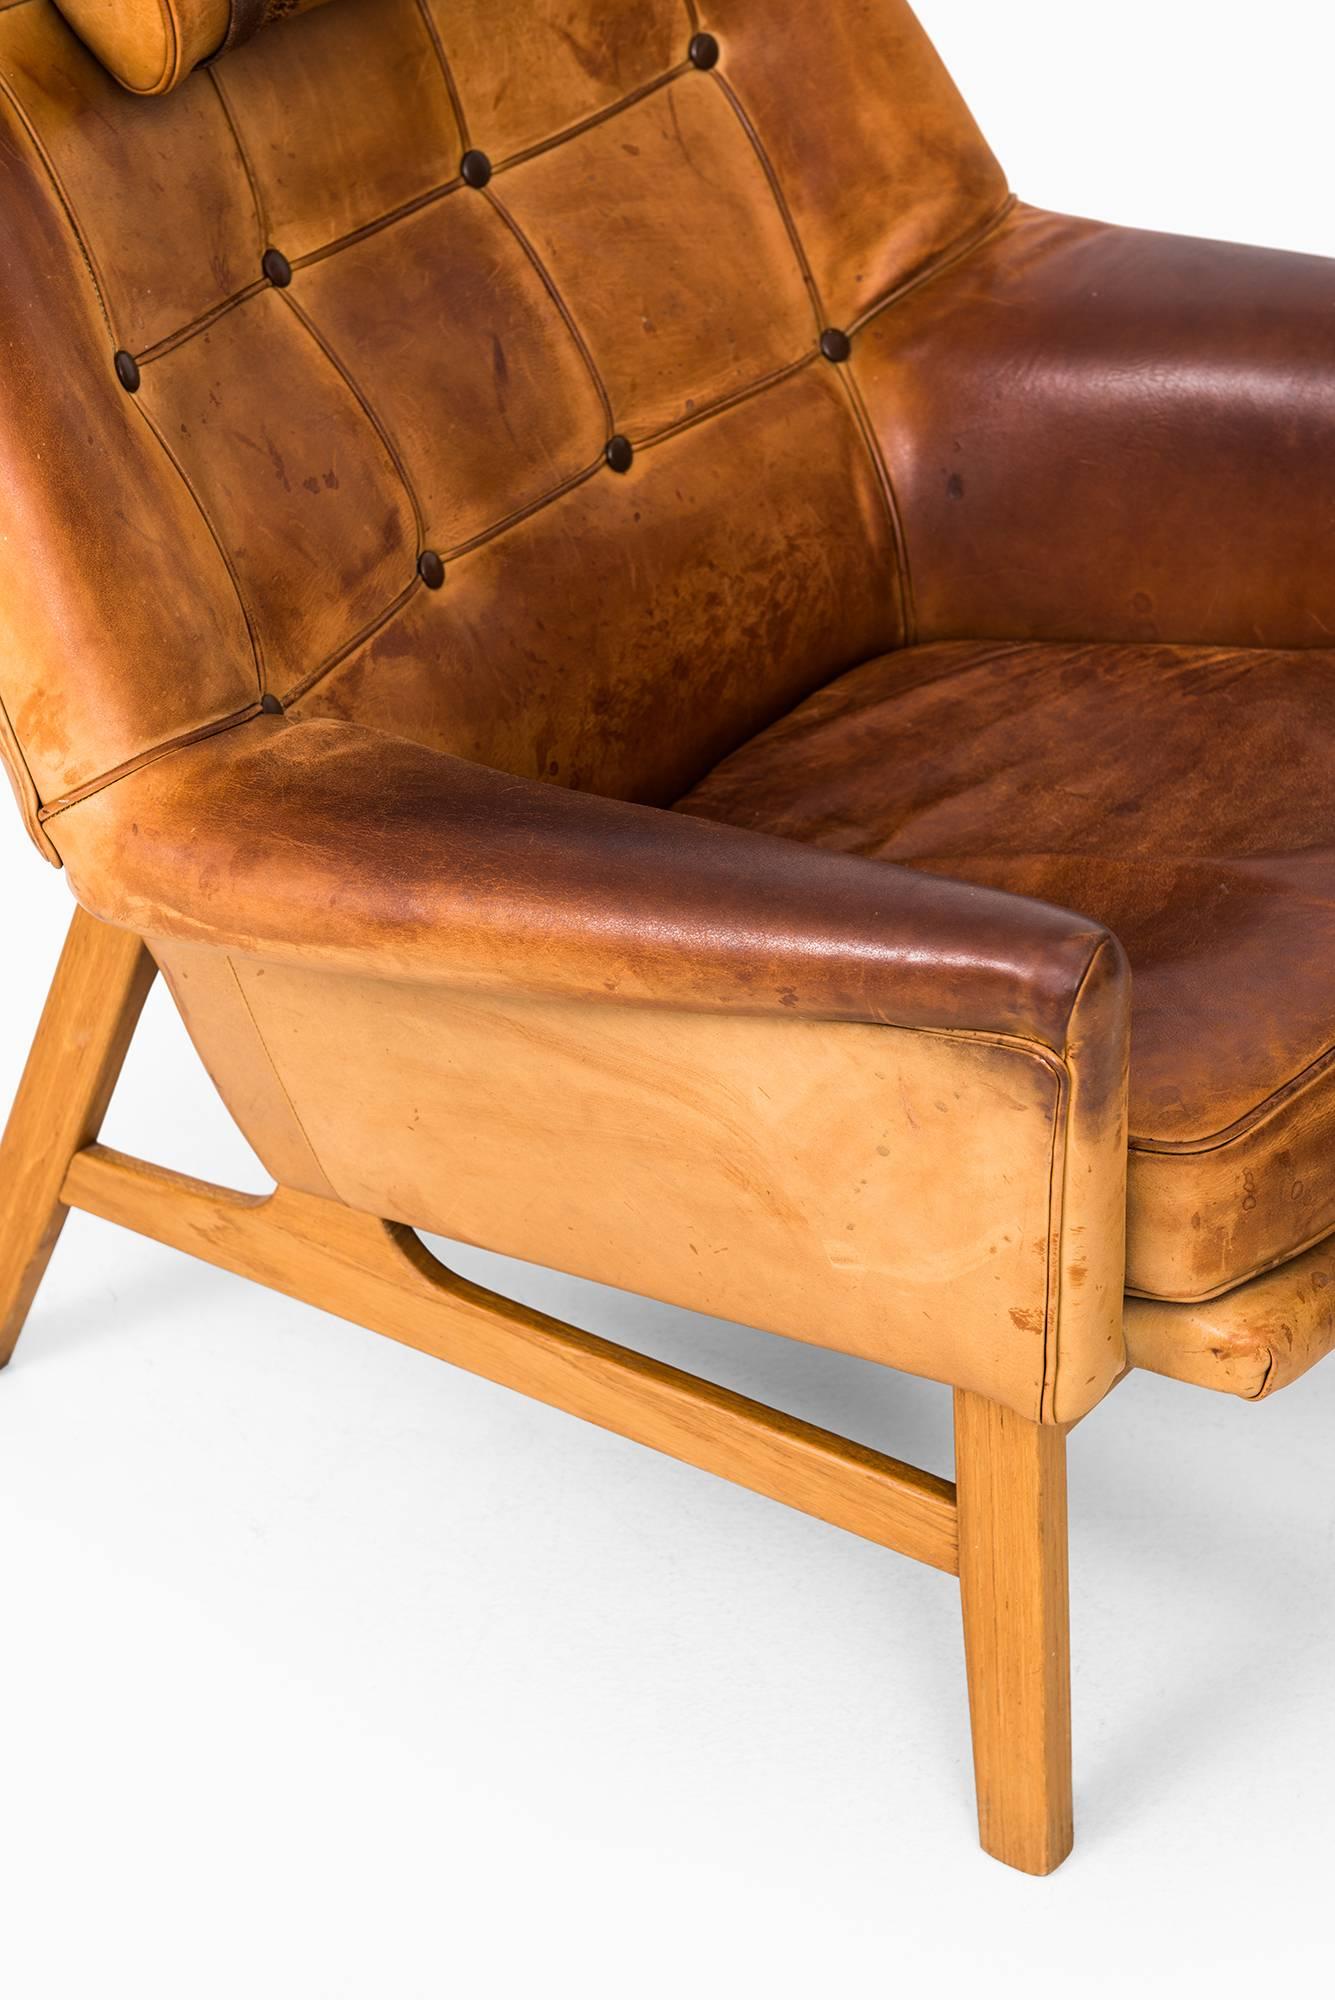 Leather Tove & Edvard Kindt-Larsen Easy Chair Model Glimminge by Ope in Sweden